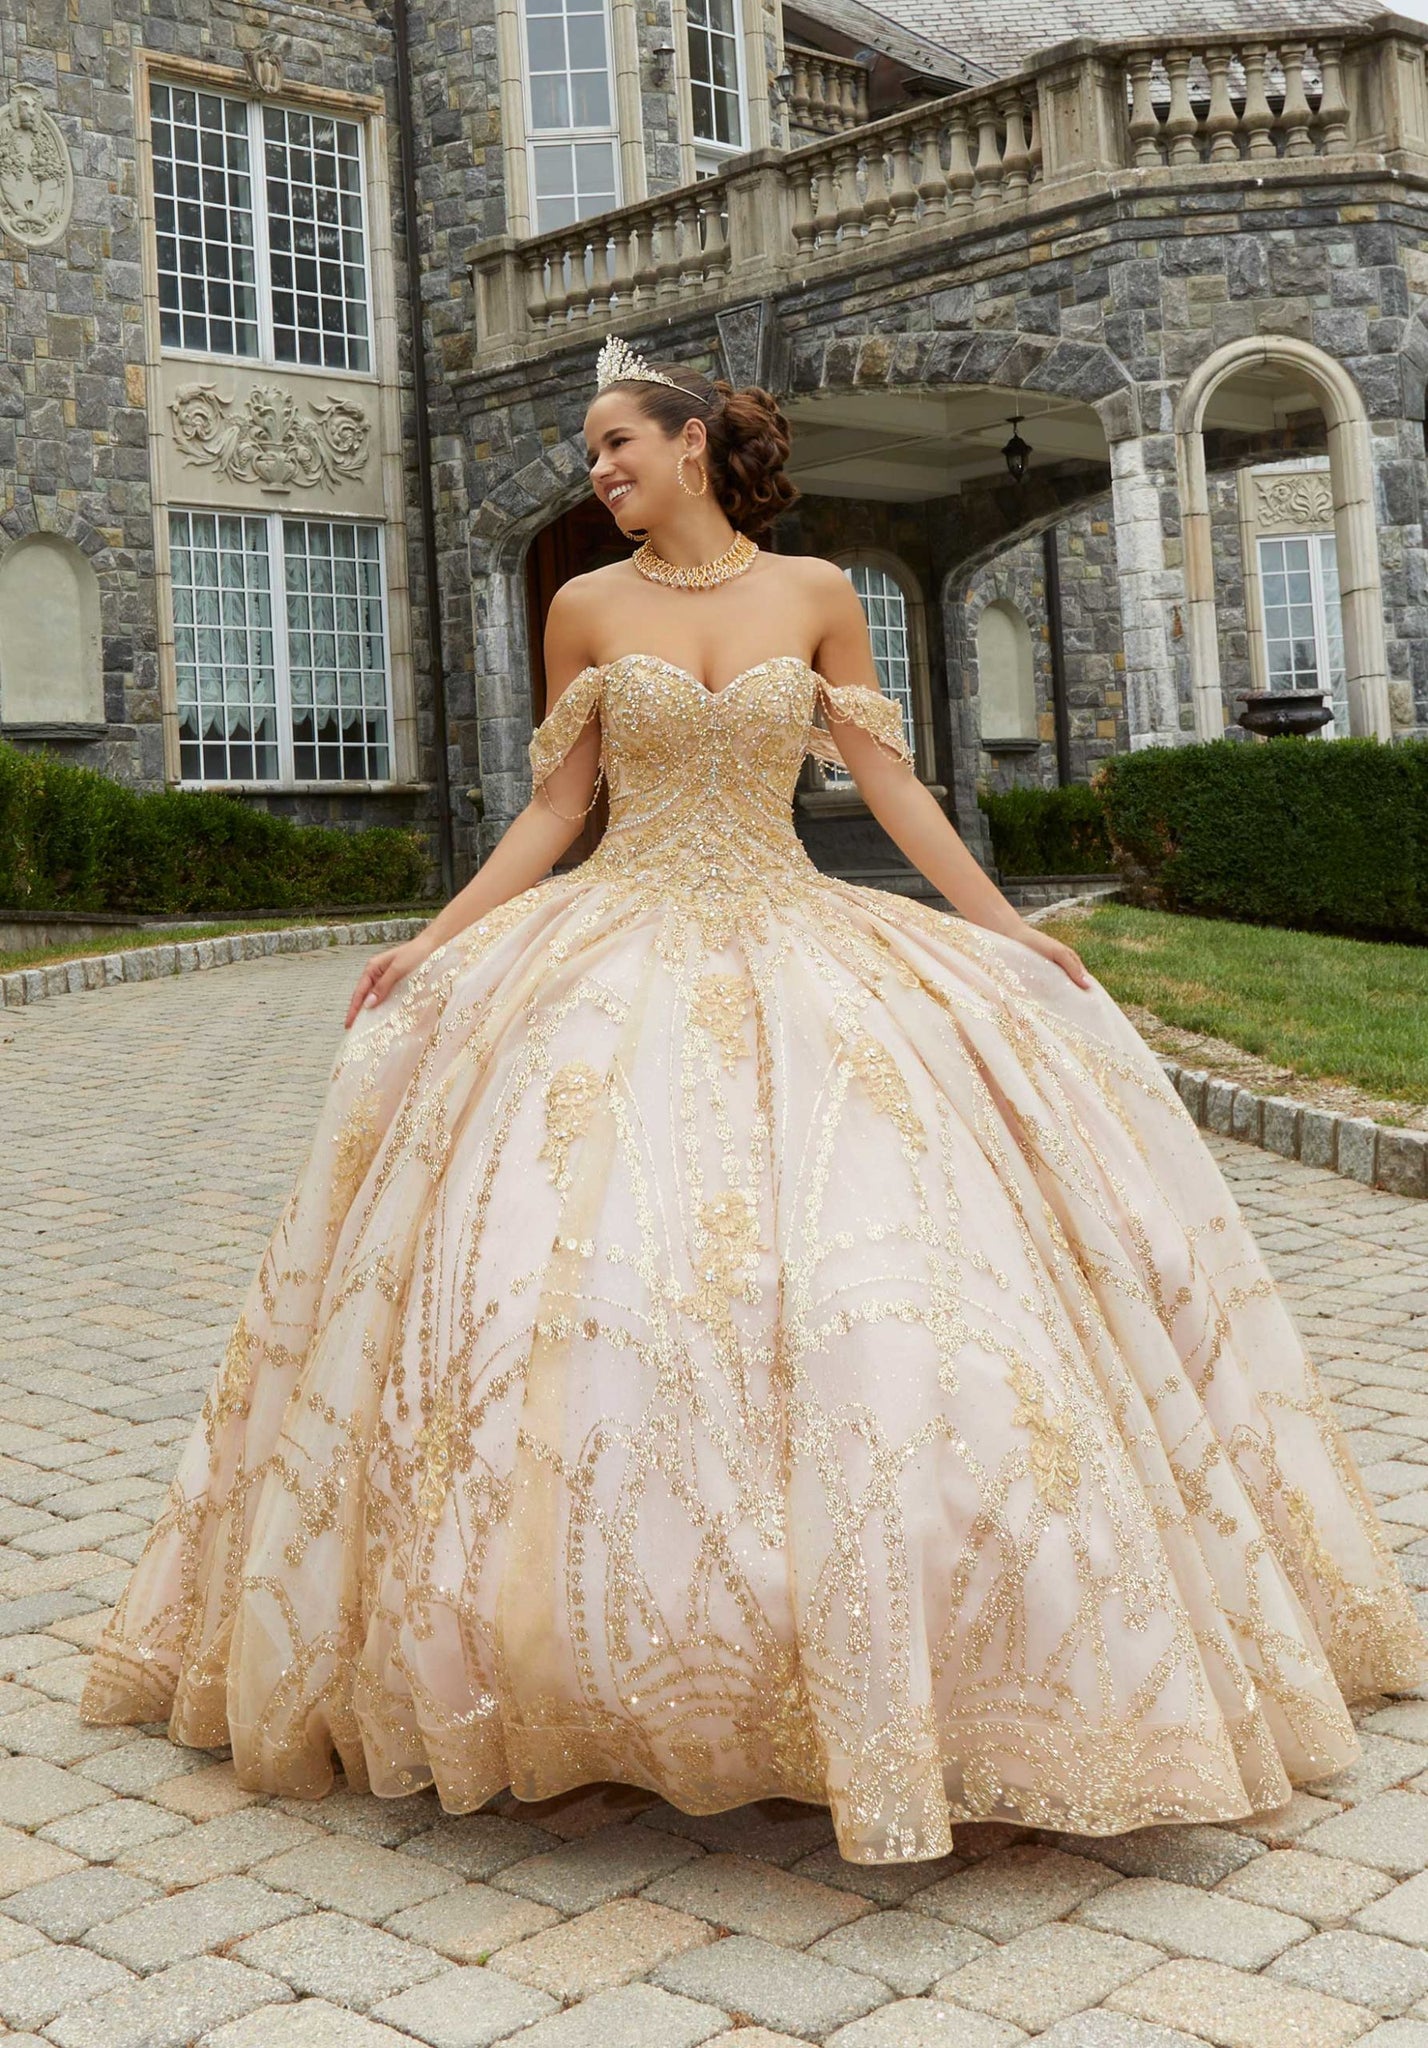 Patterned Glitter Quinceañera Dress with Chandelier Beading